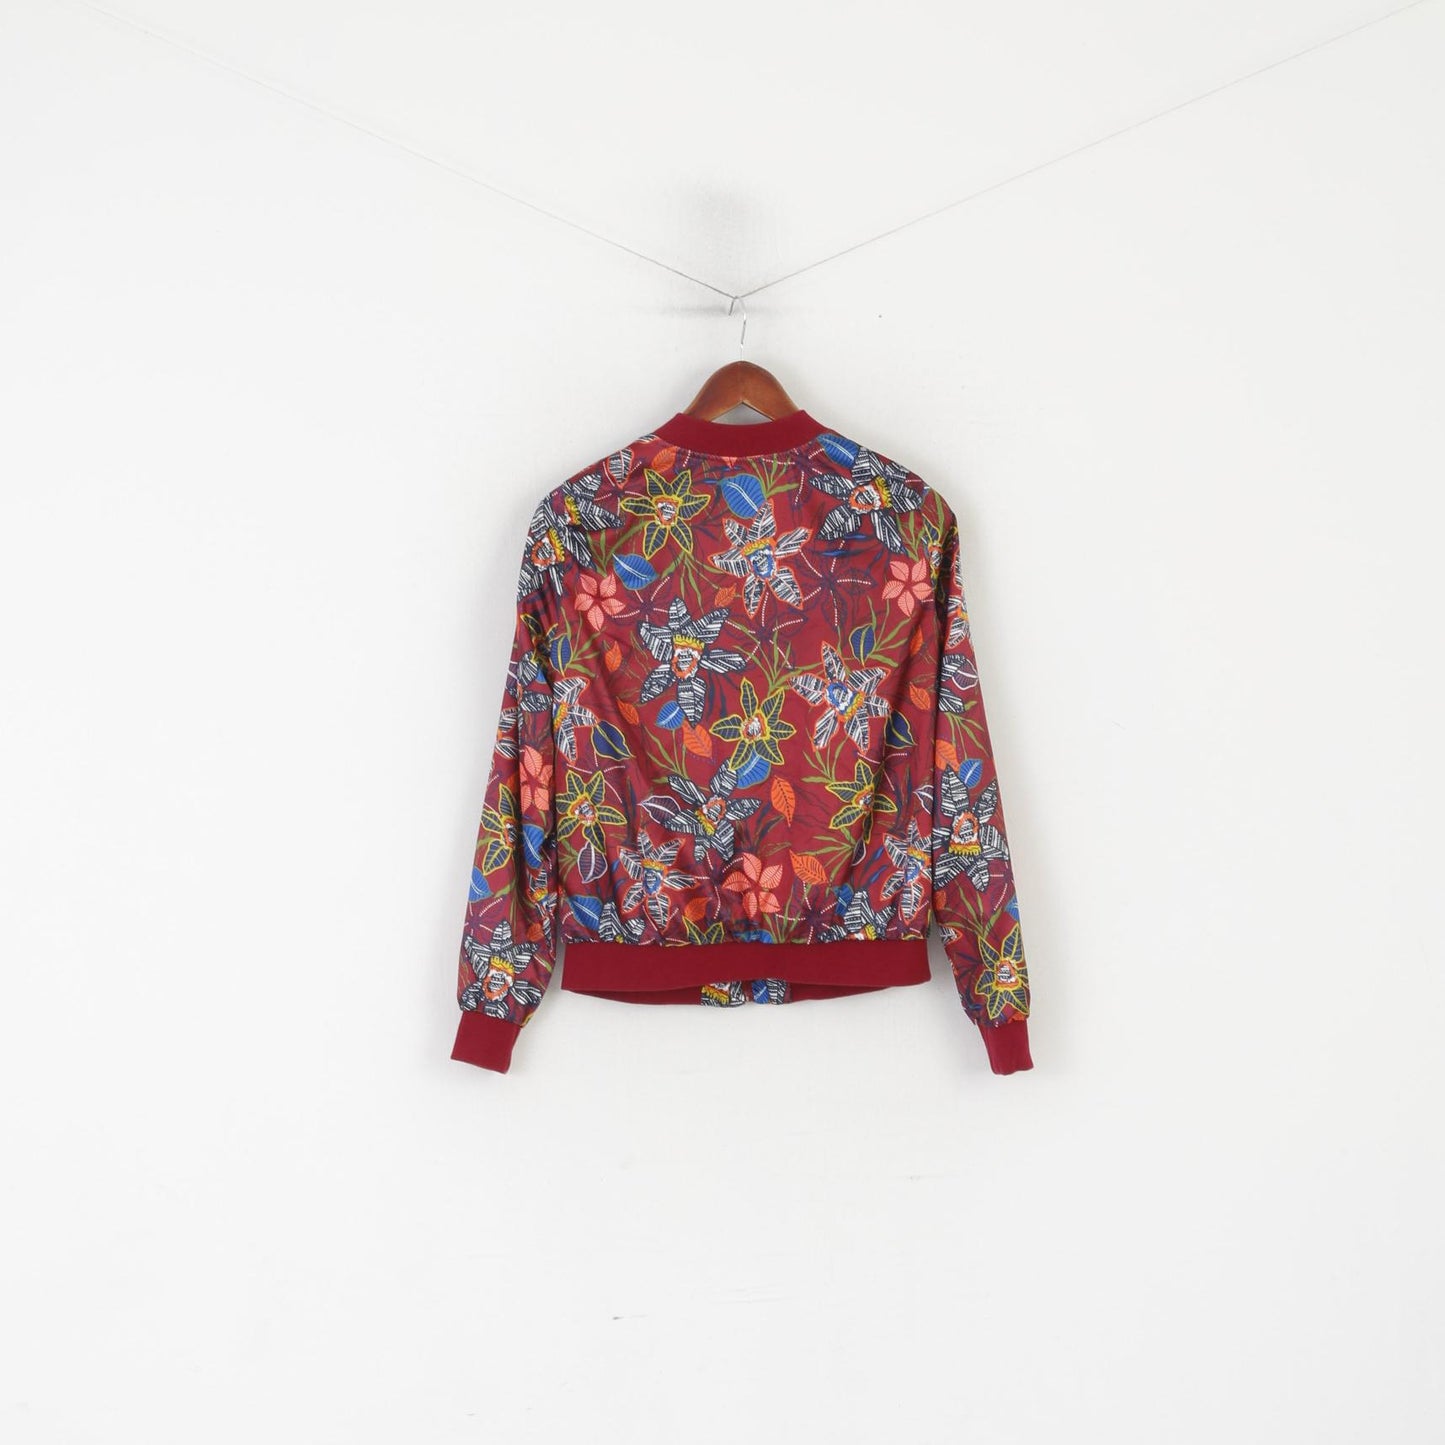 Colours of the world Women 14 42 M Bomber Jacket Maroon Floral Lightweight Top